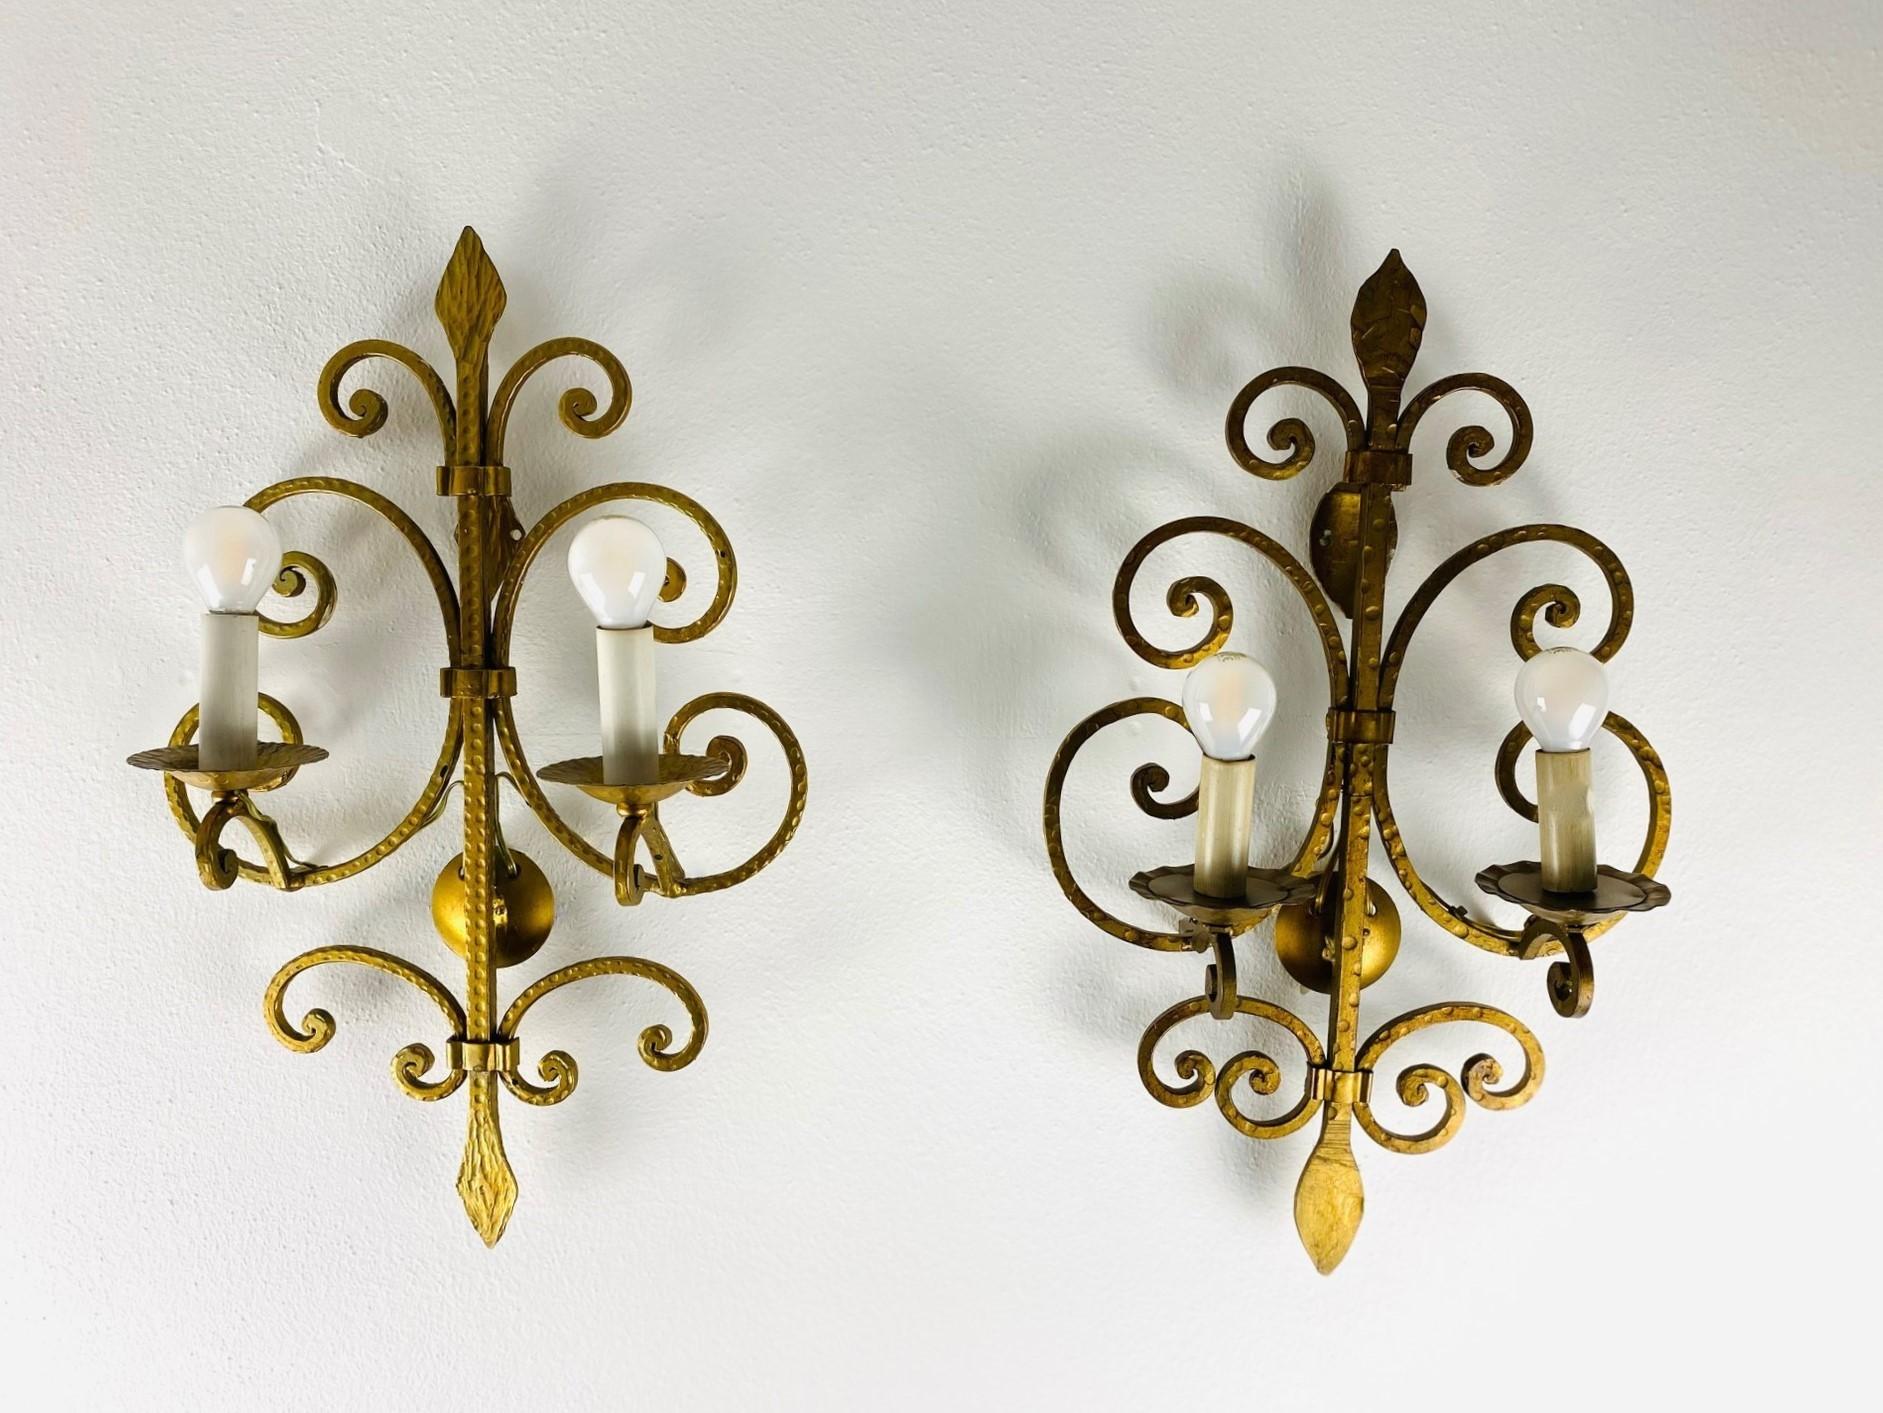 
A pair of large hand-crafted gilt iron two-arm electrified wall sconces, France, 1930s. Both sconces are in fine vintage condition, gilt very well preserved, beautiful aged patina, no damages.
Measures: Height 17.50